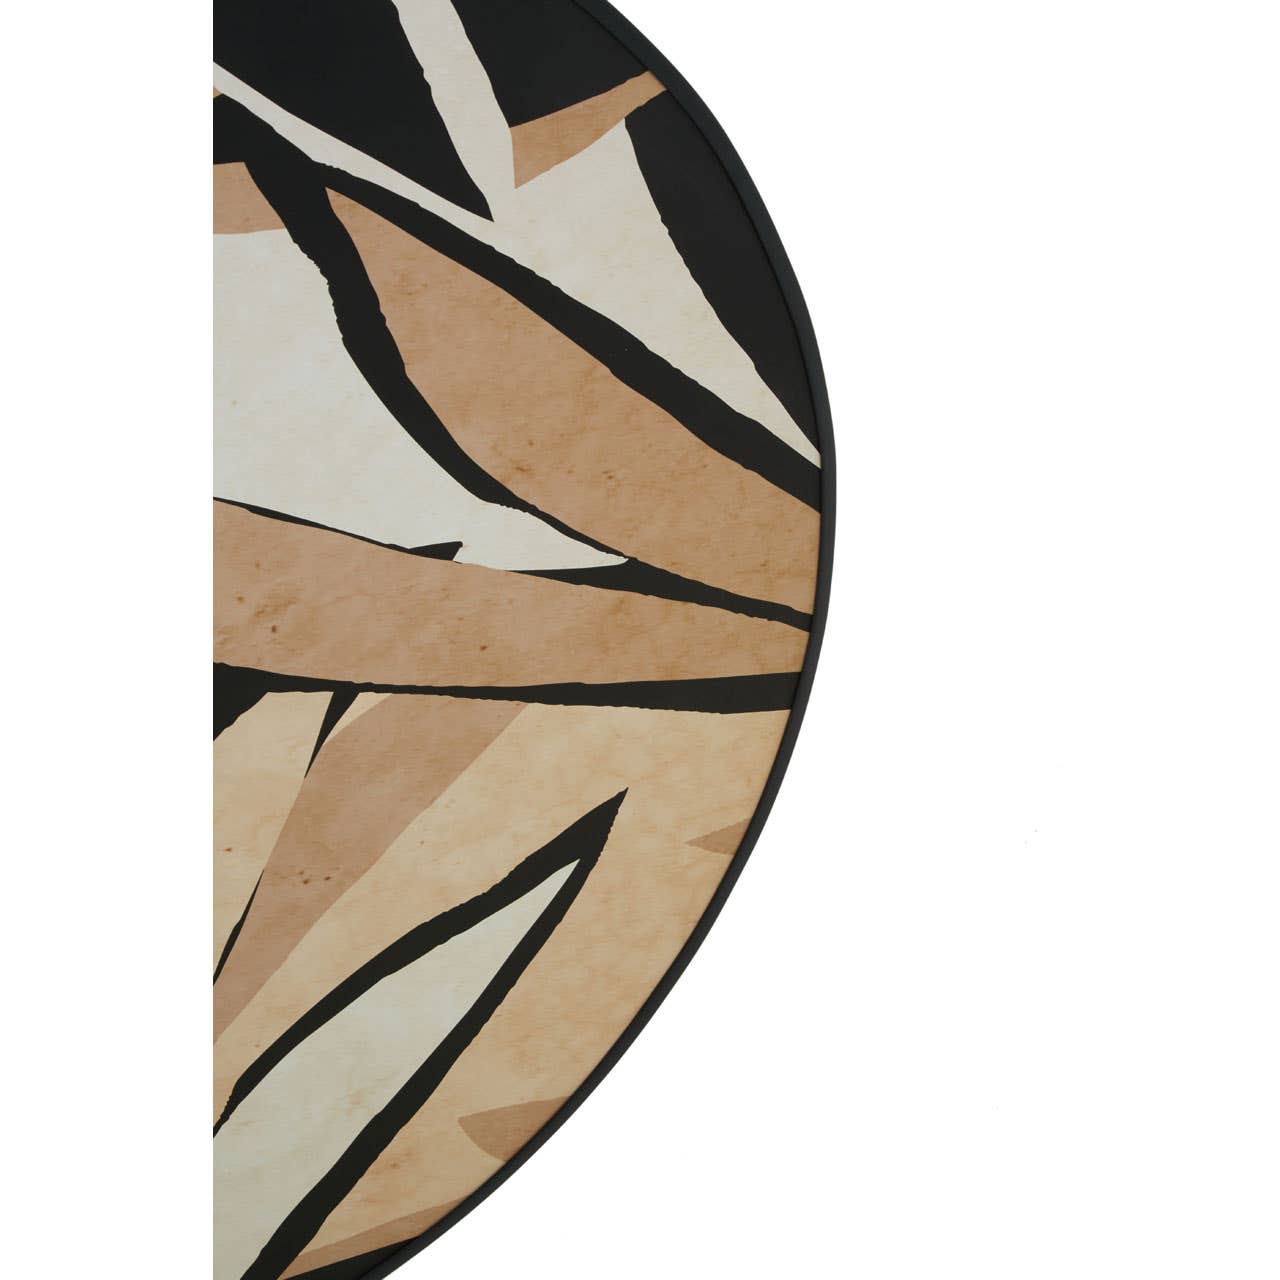 Noosa & Co. Accessories Astratto Round Wall Art House of Isabella UK